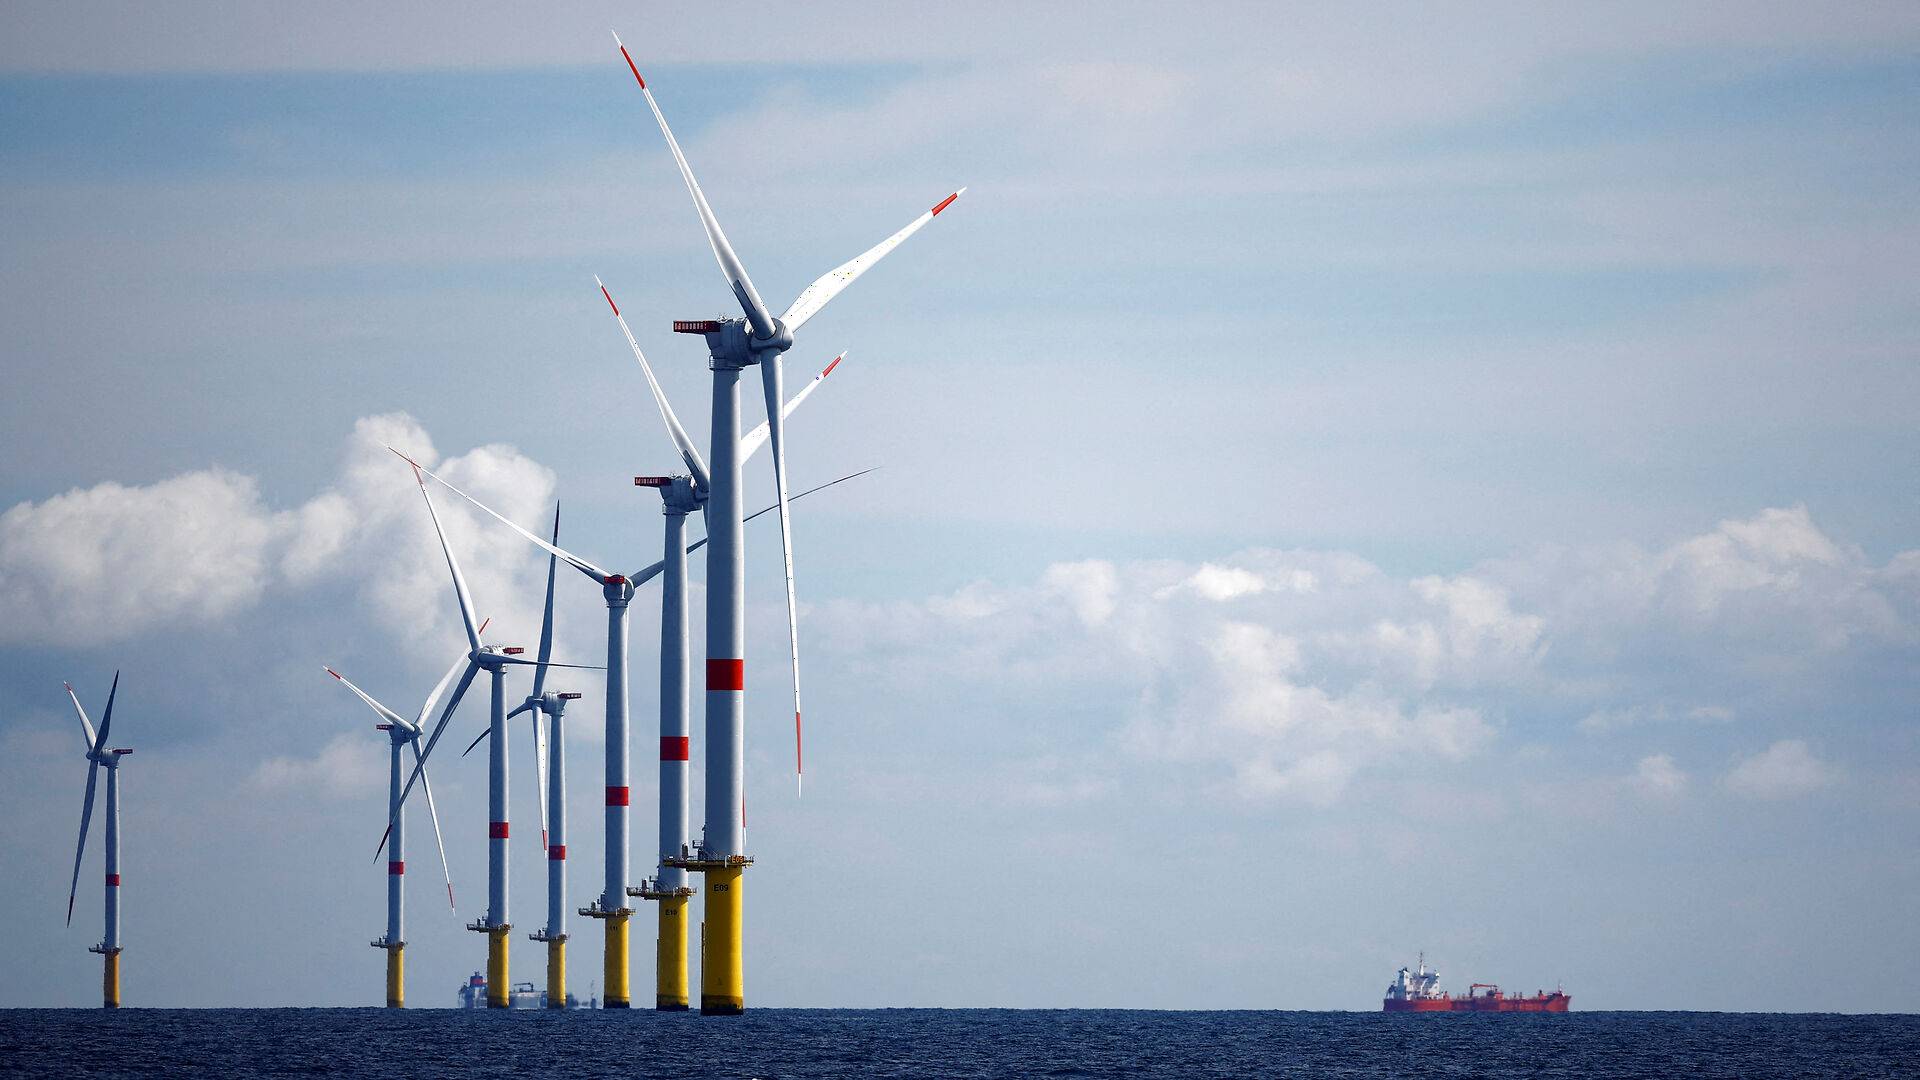 Thousands of wind turbines headed offshore – but challenges loom